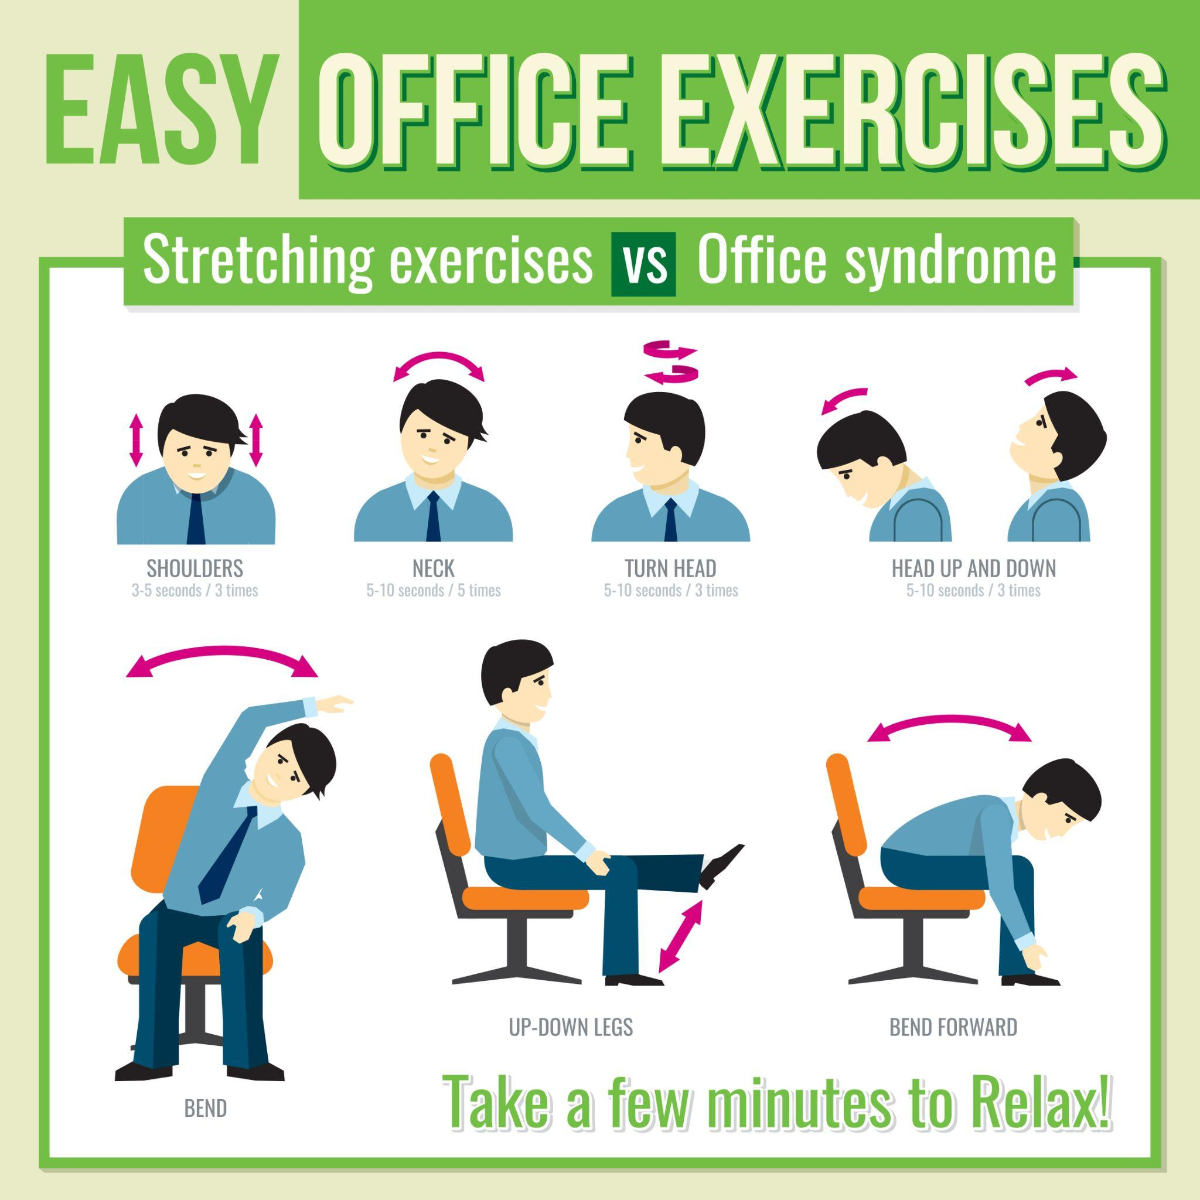 Some simple exercises at work to manage aches during work hours